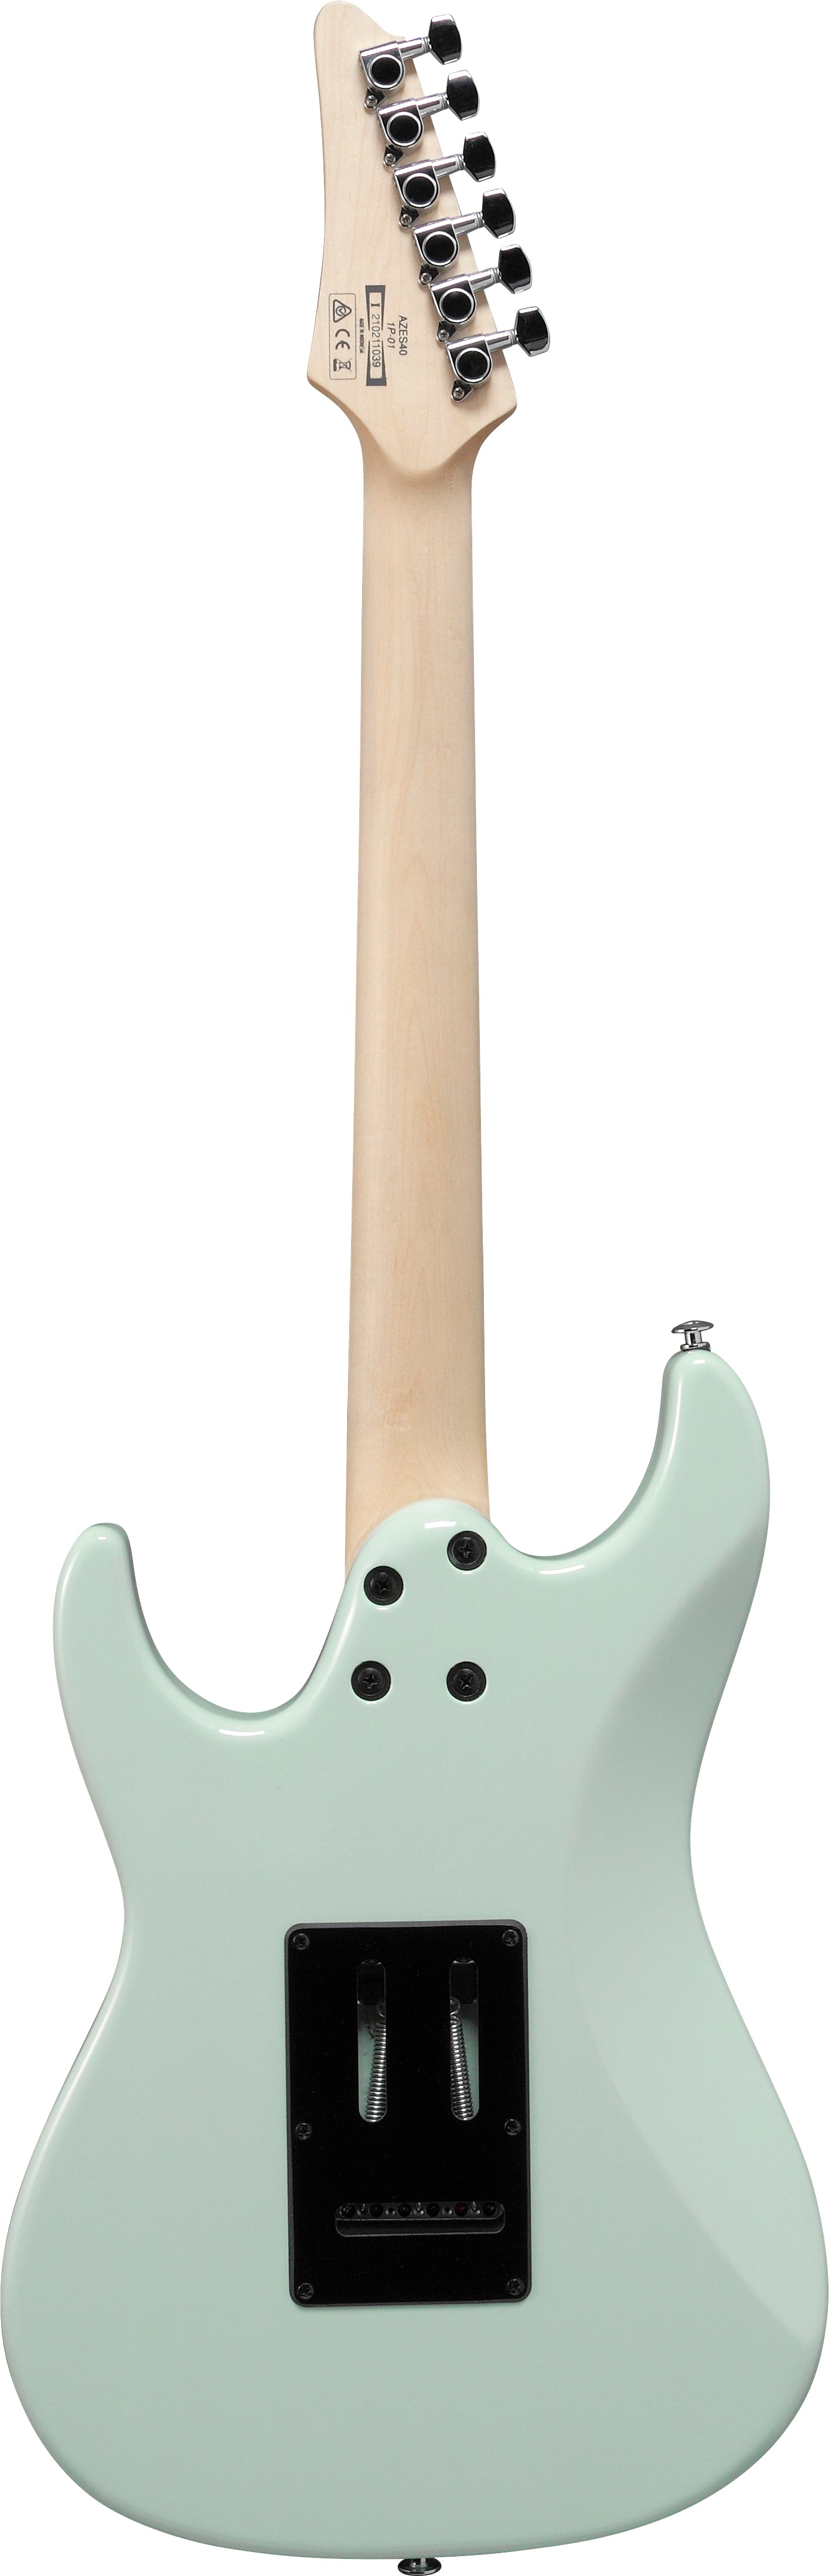 IBANEZ AZES40 Electric Guitar (MGR : Mint Green)